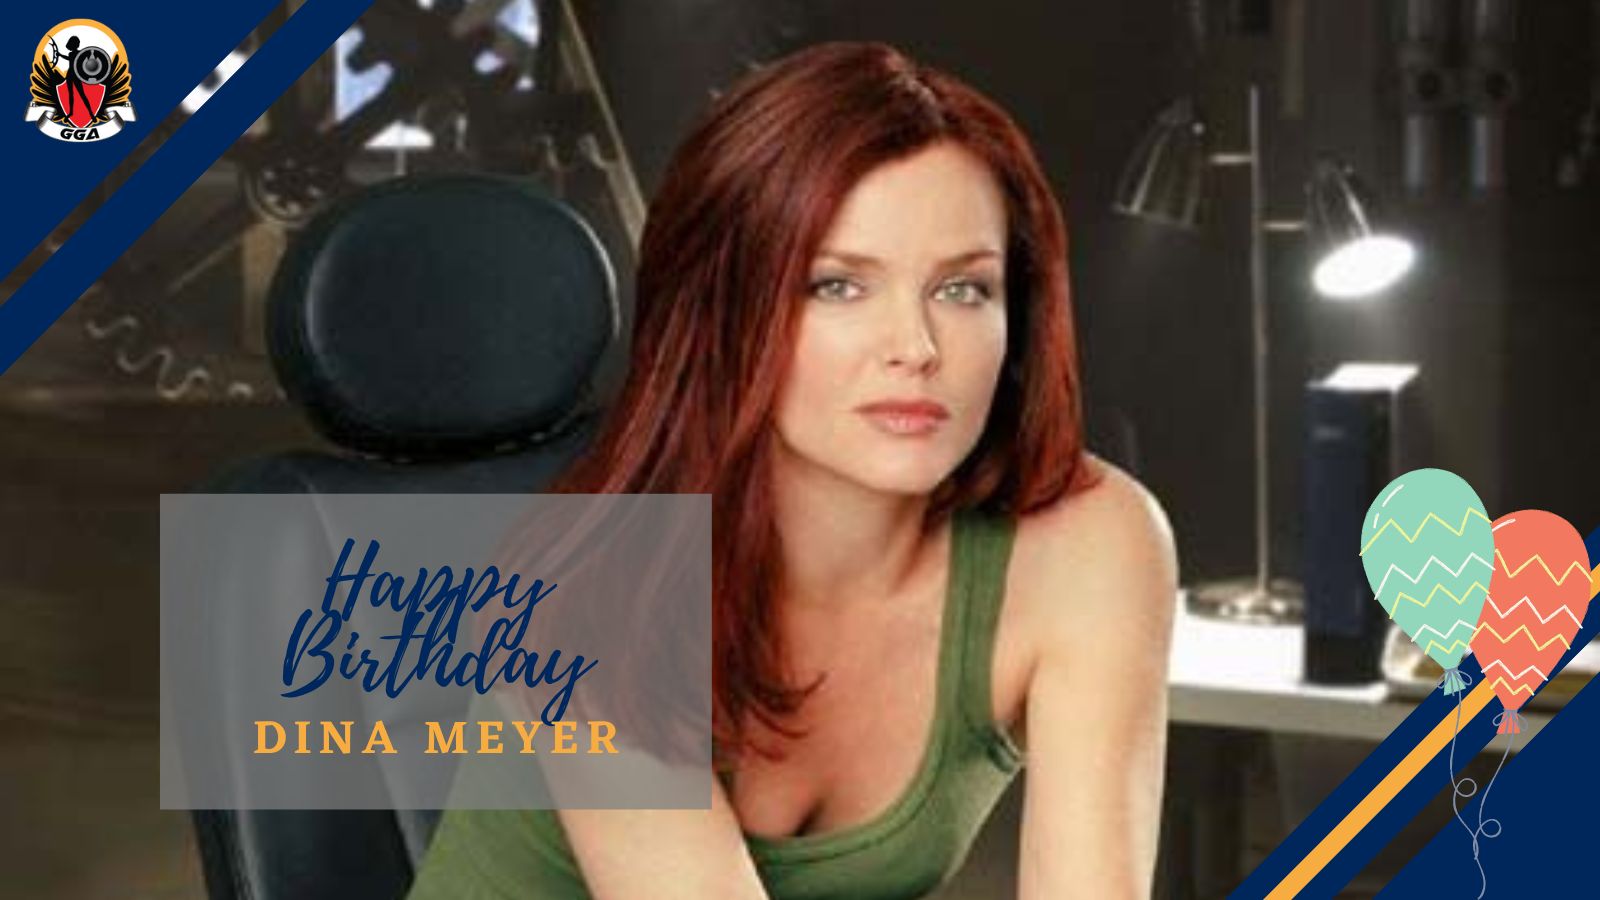 Happy birthday Dina Meyer!  Which role of hers is your favorite?  